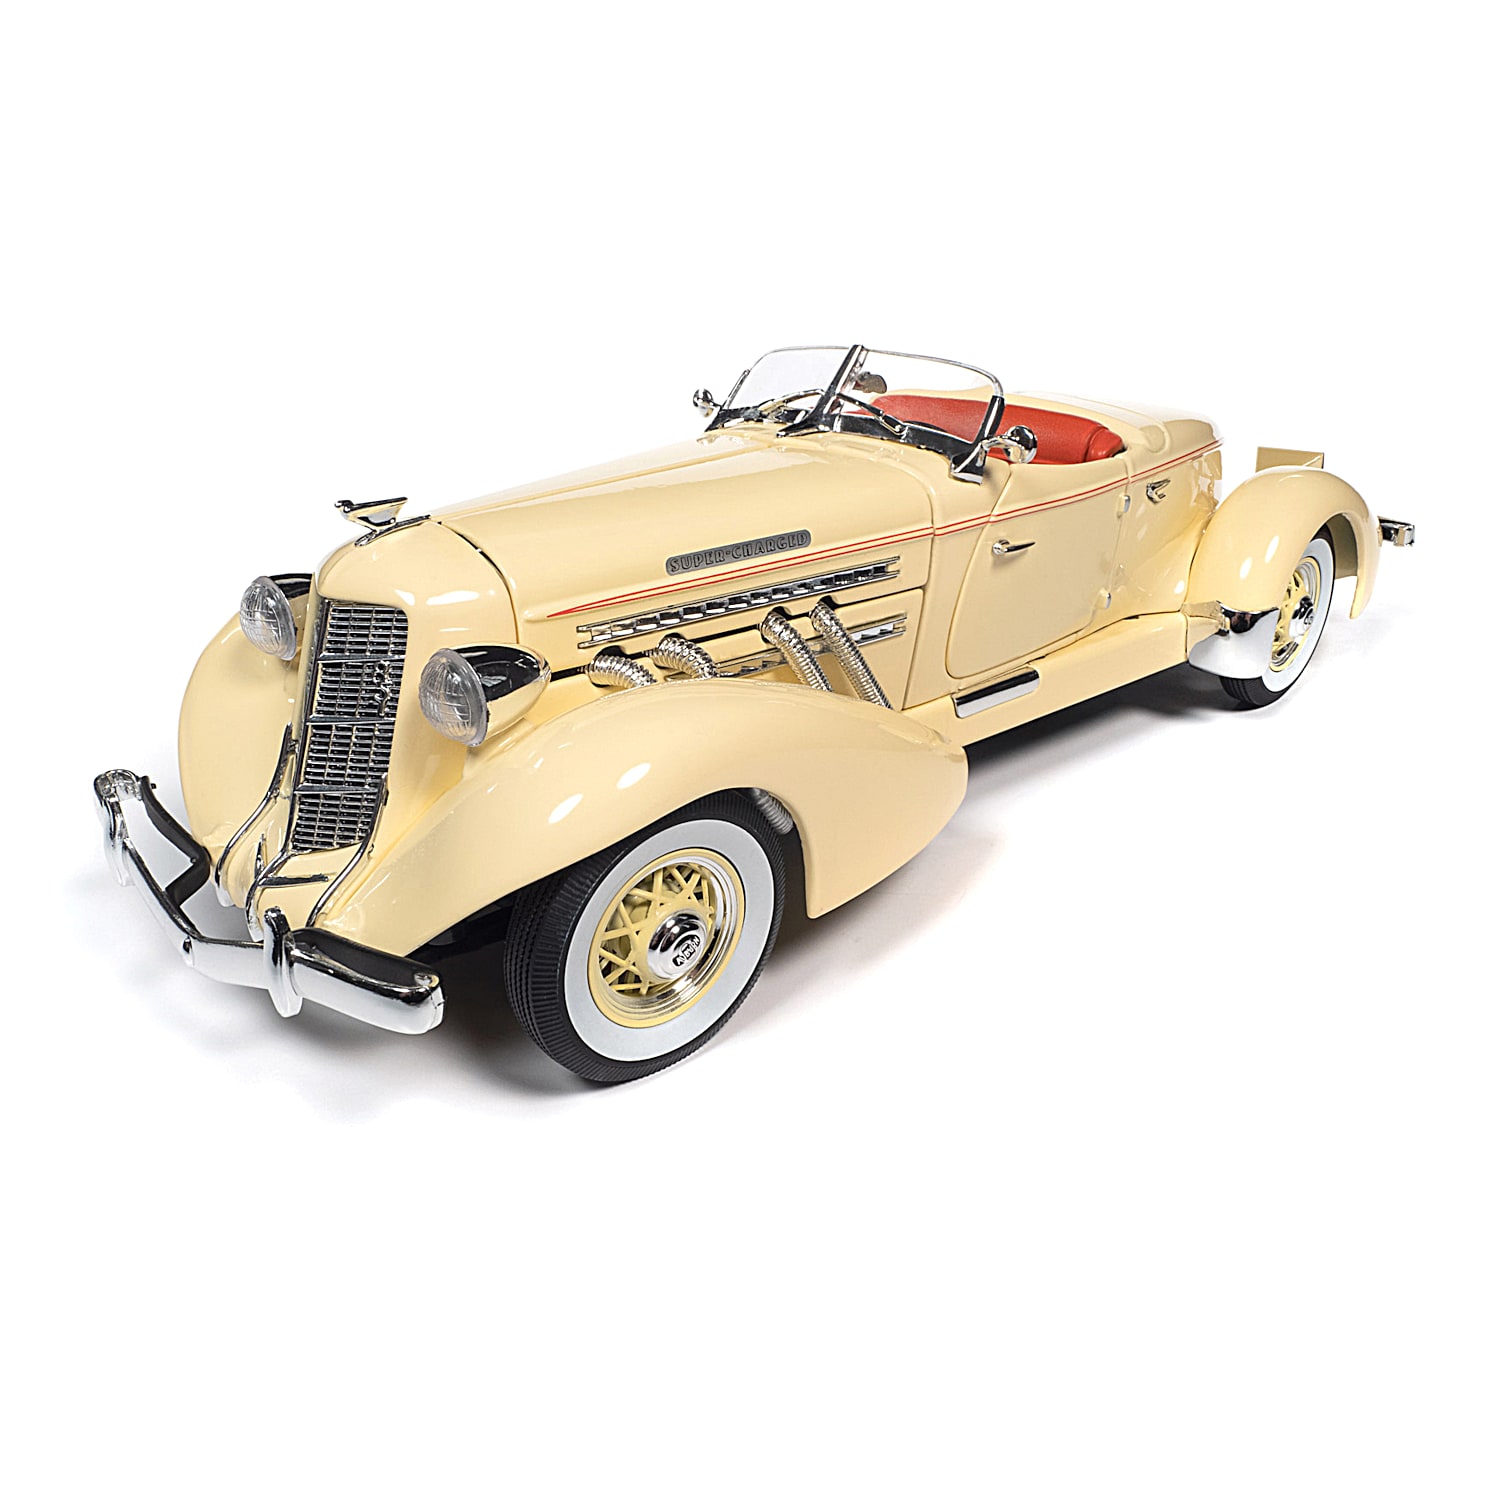 1:18-Scale 1935 Auburn 851 Diecast Car With Over 200 Parts And Features An  Art Deco-Inspired Design With Swept-Back Pontoon Fenders And Boattail Rear